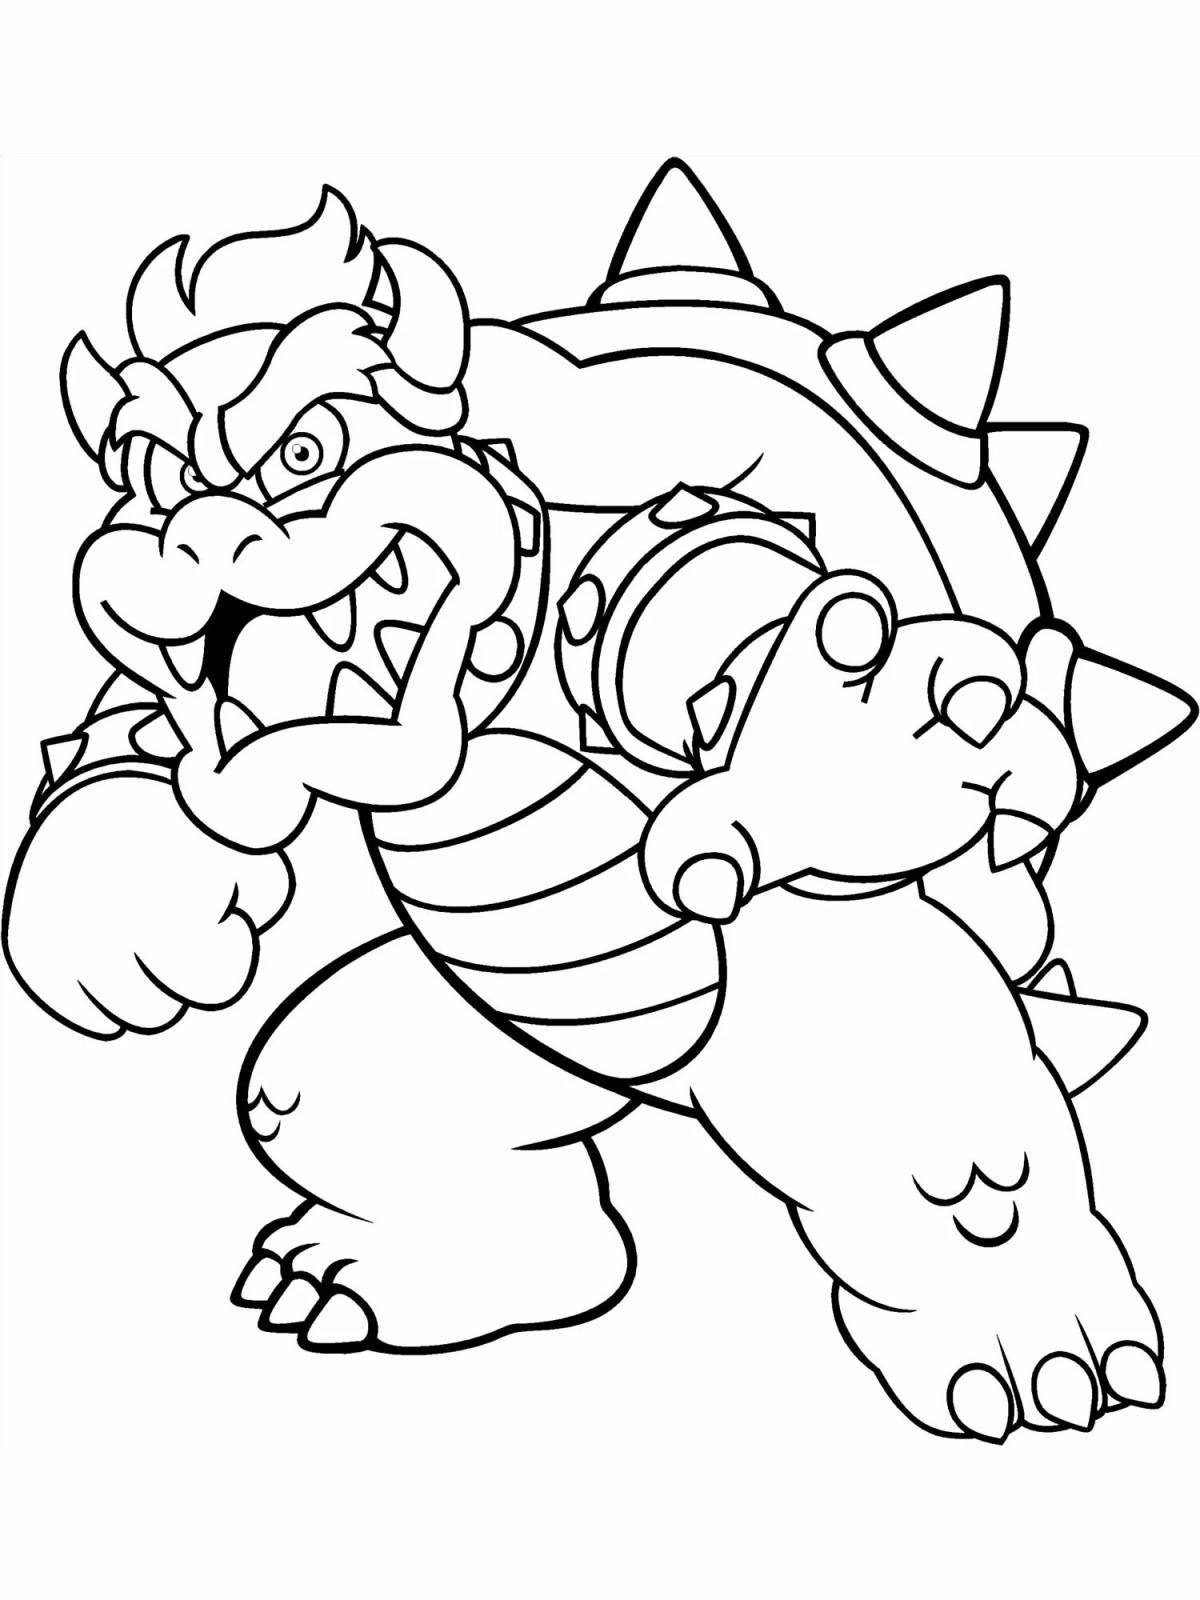 Playful bowser coloring